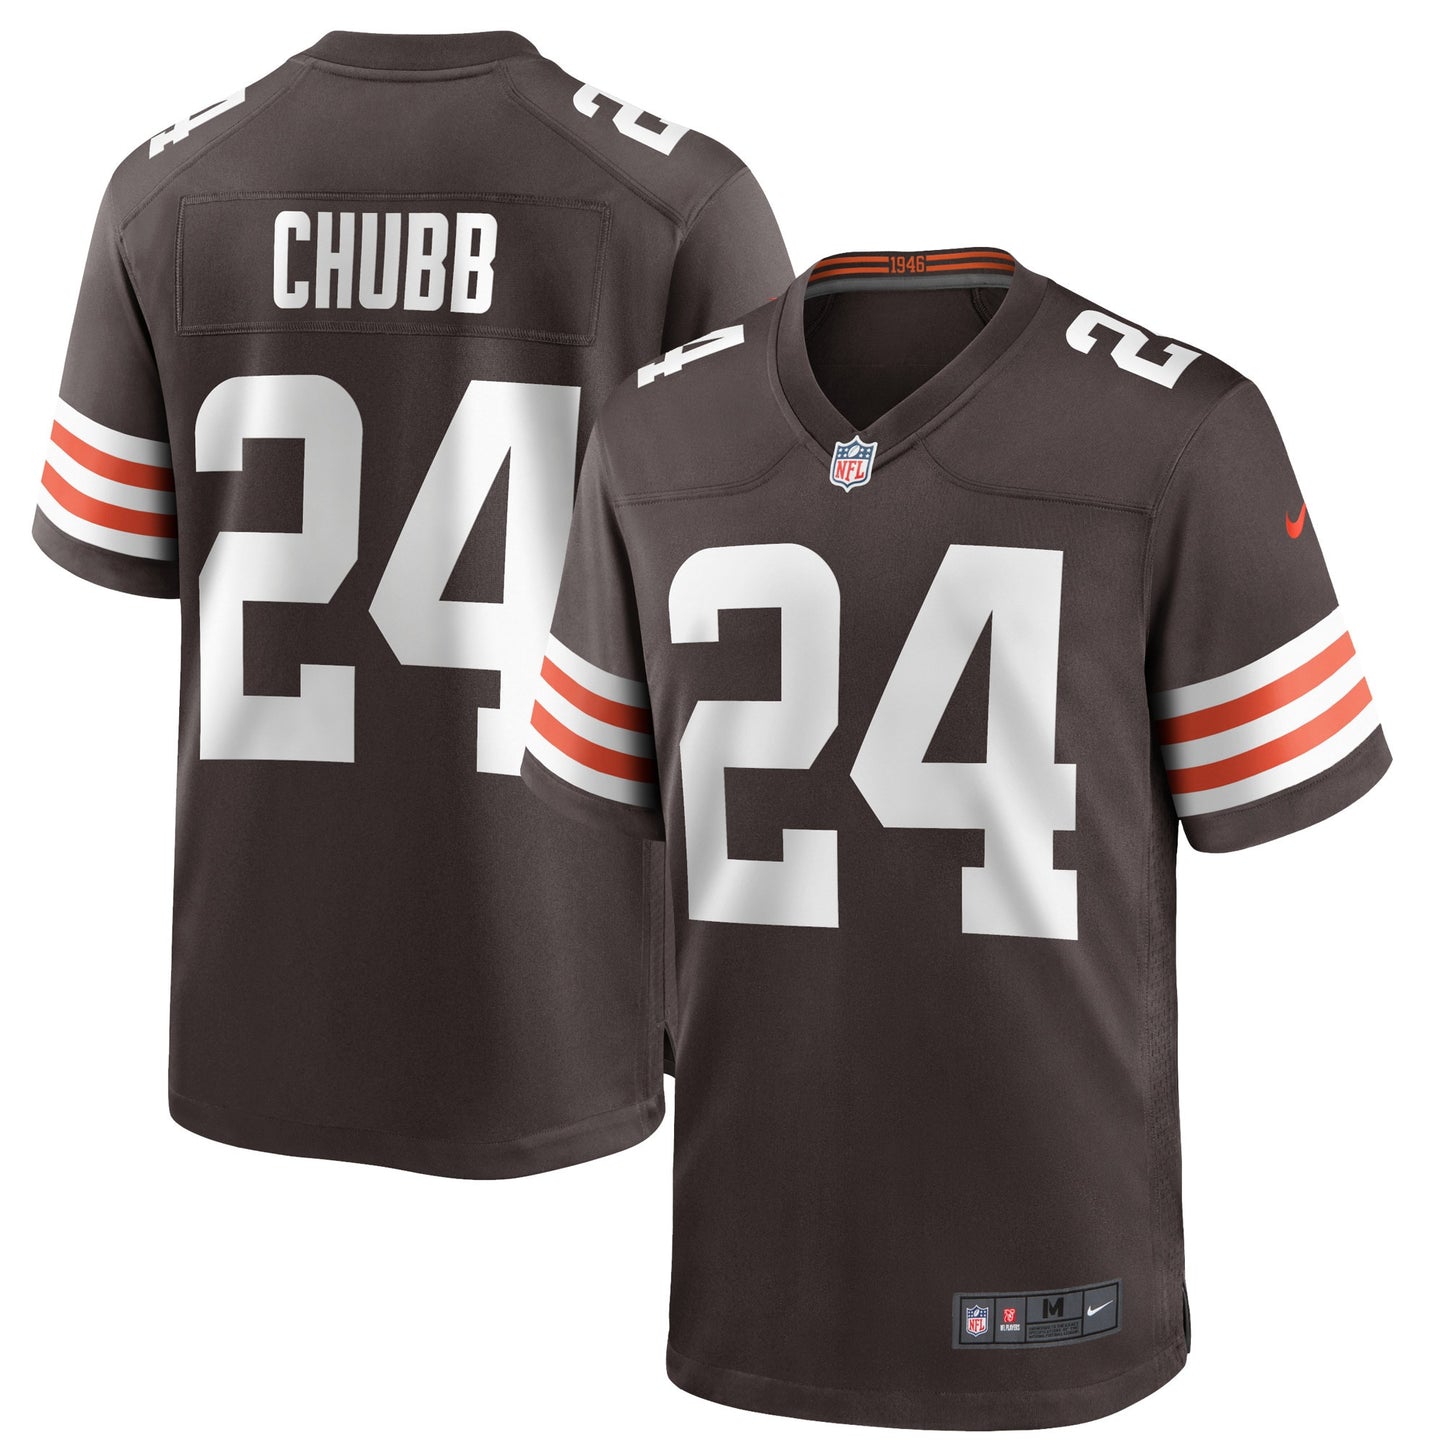 Nick Chubb Cleveland Browns Nike Game Player Jersey - Brown